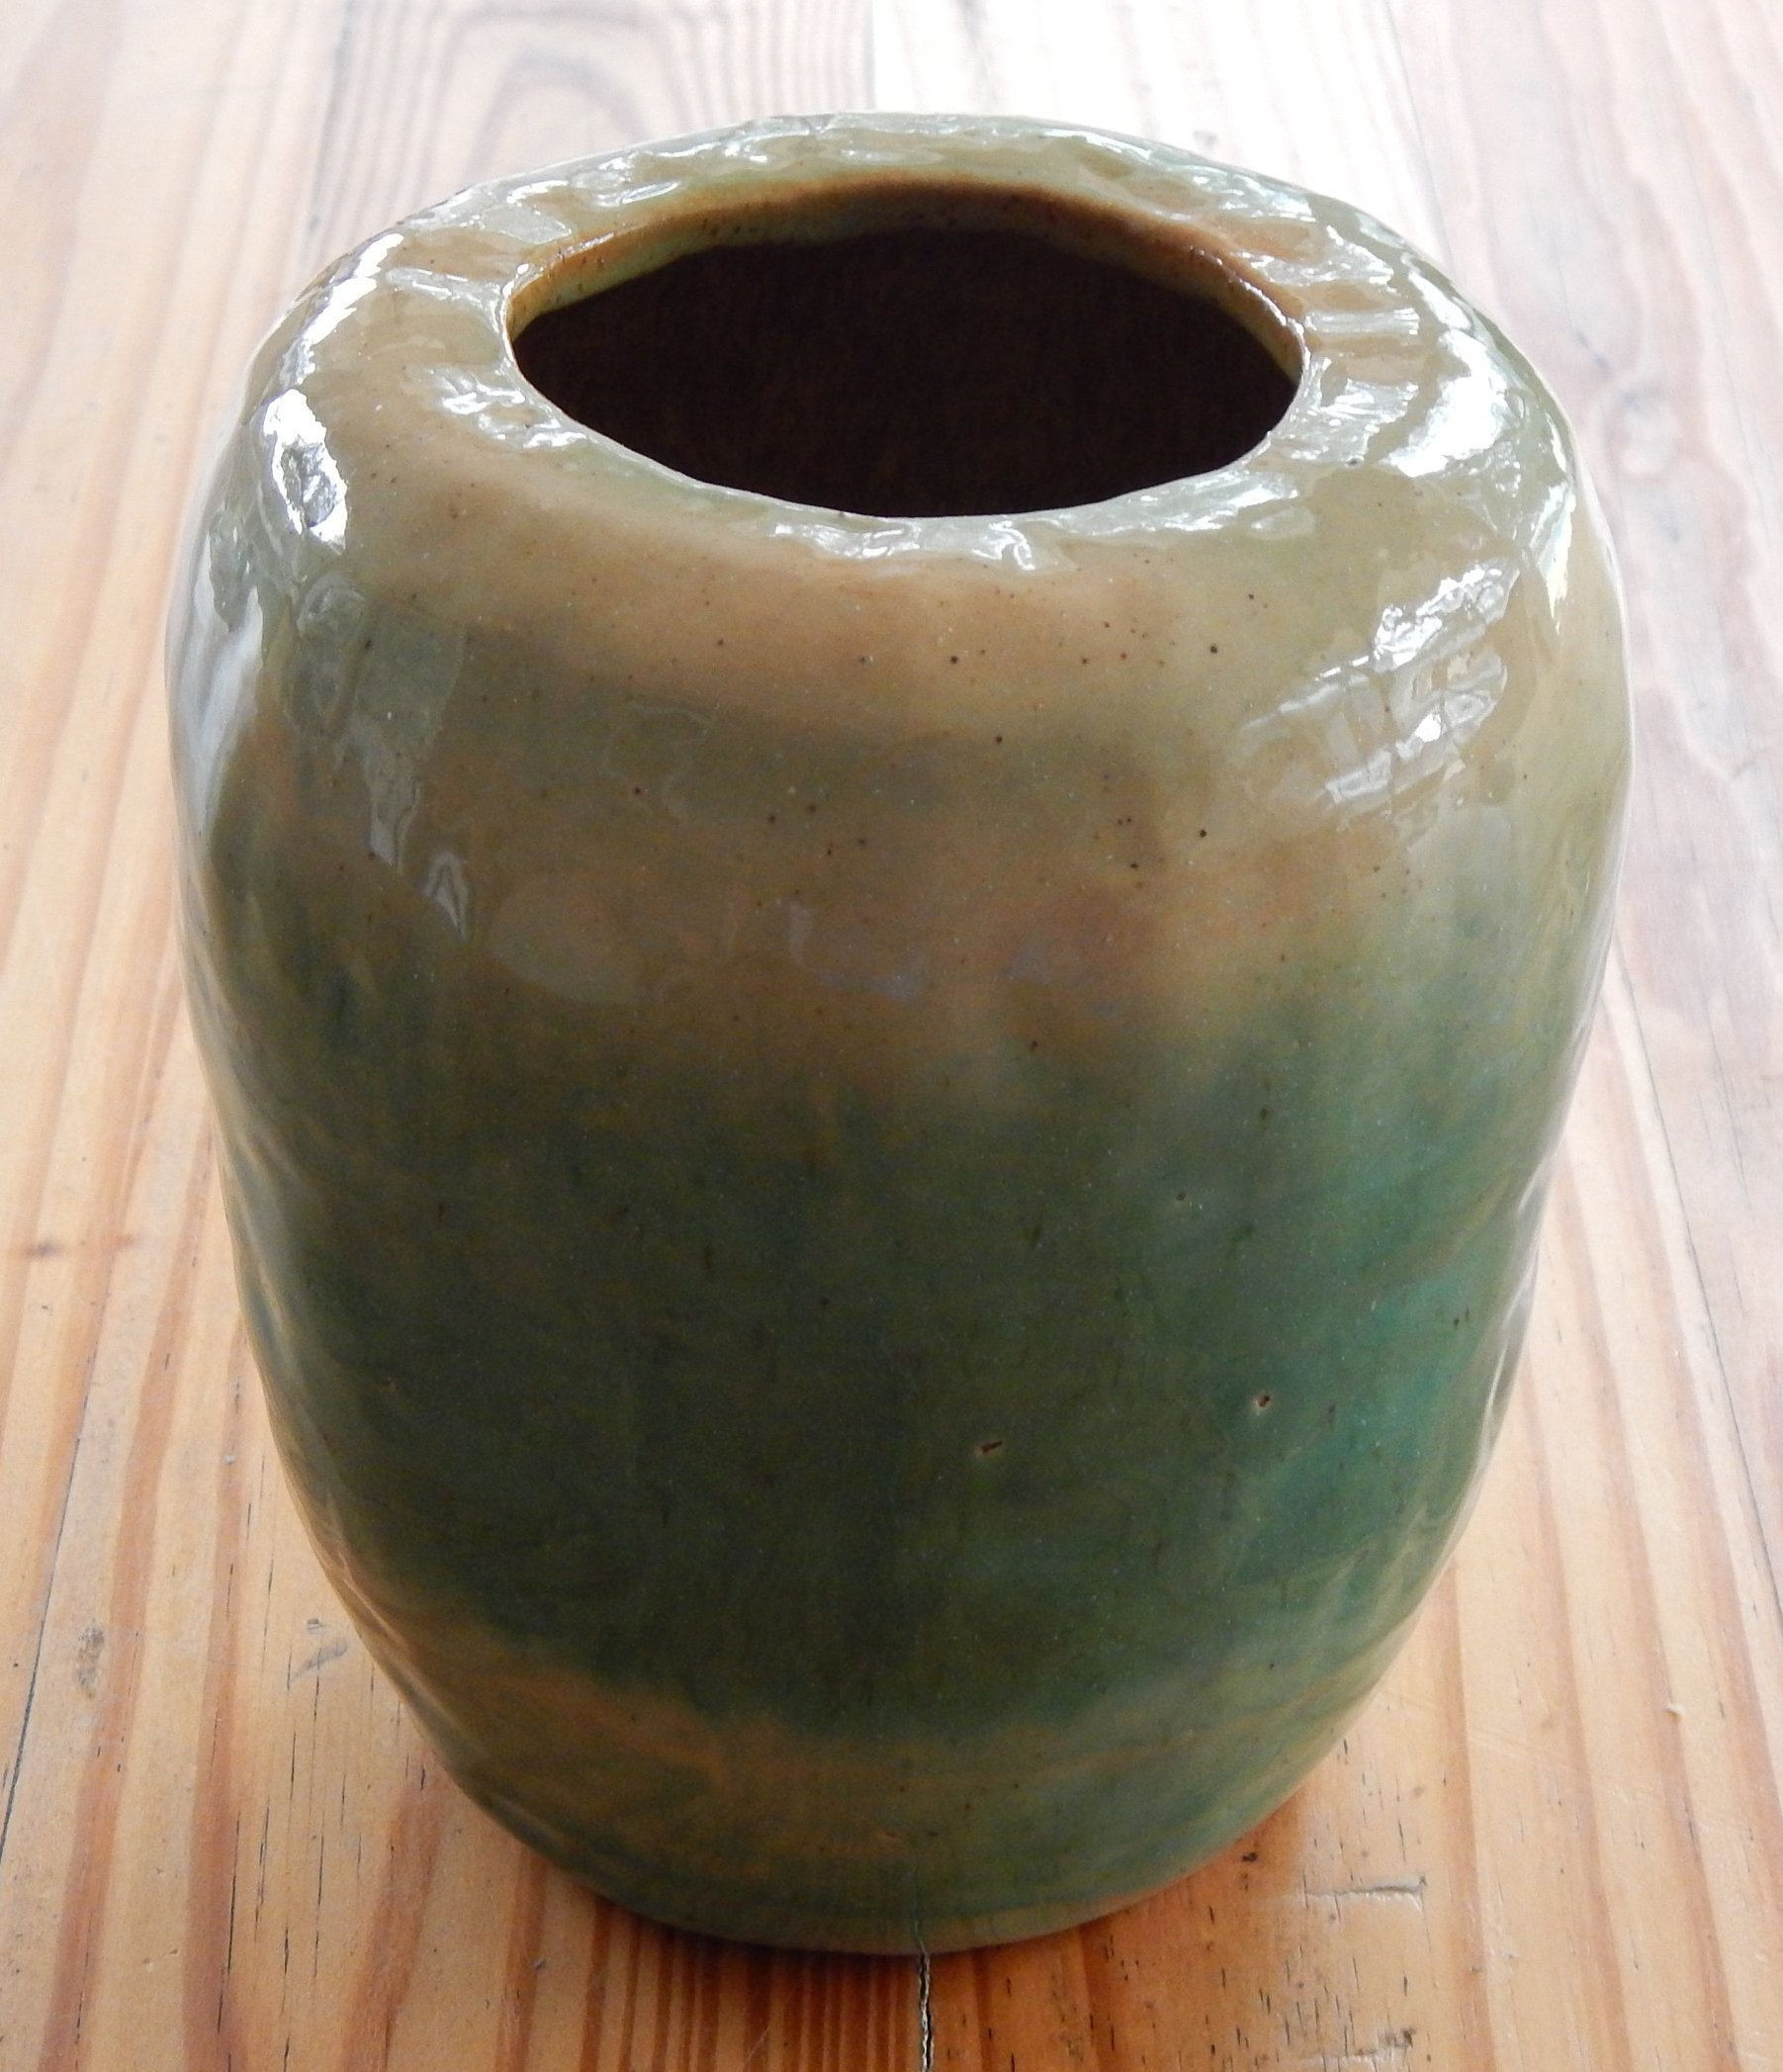 24 Fabulous Hall Pottery Vase 2024 free download hall pottery vase of vintage maplesden pottery vase carved on bottom nov 17 maplesden inside excited to share the latest addition to my etsy shop vintage maplesden pottery carved on bottom n